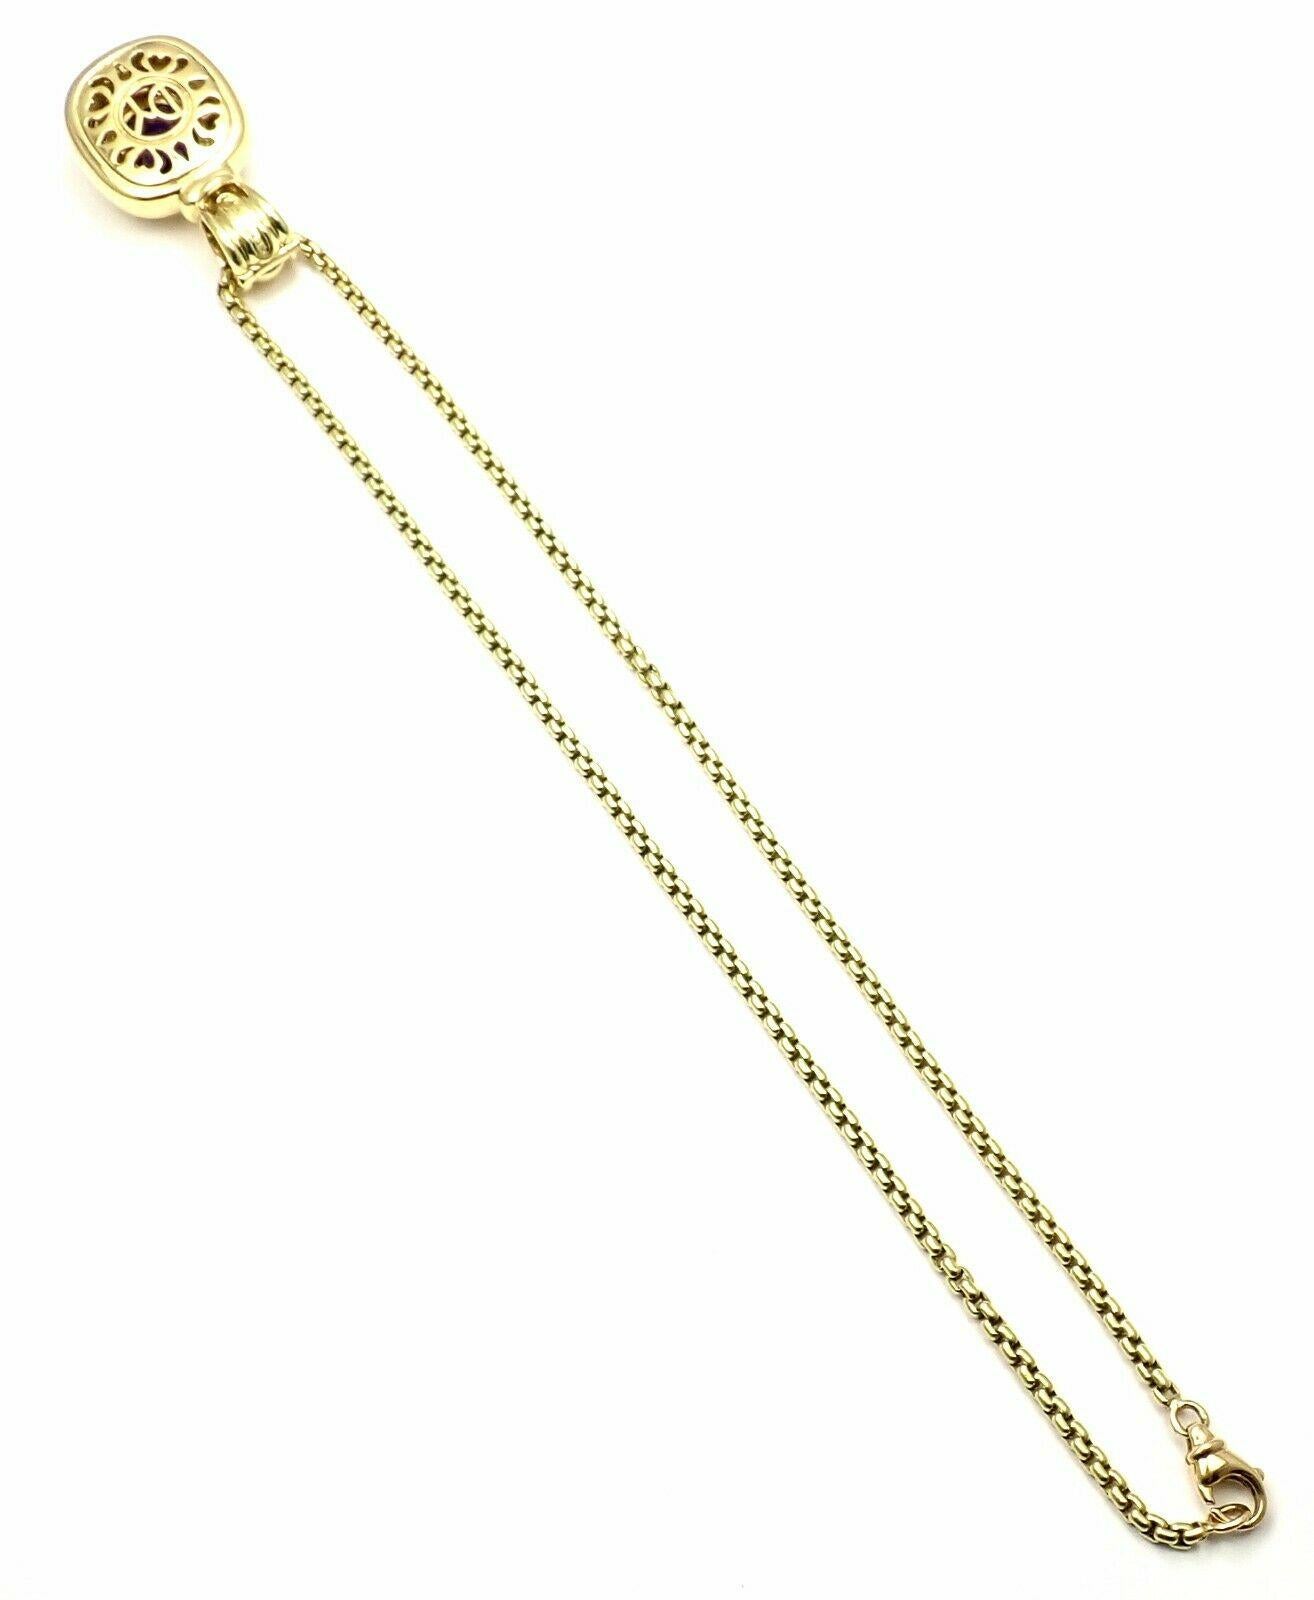 Women's or Men's David Yurman Diamond Amethyst Large Cable Pendant Chain Yellow Gold Necklace For Sale